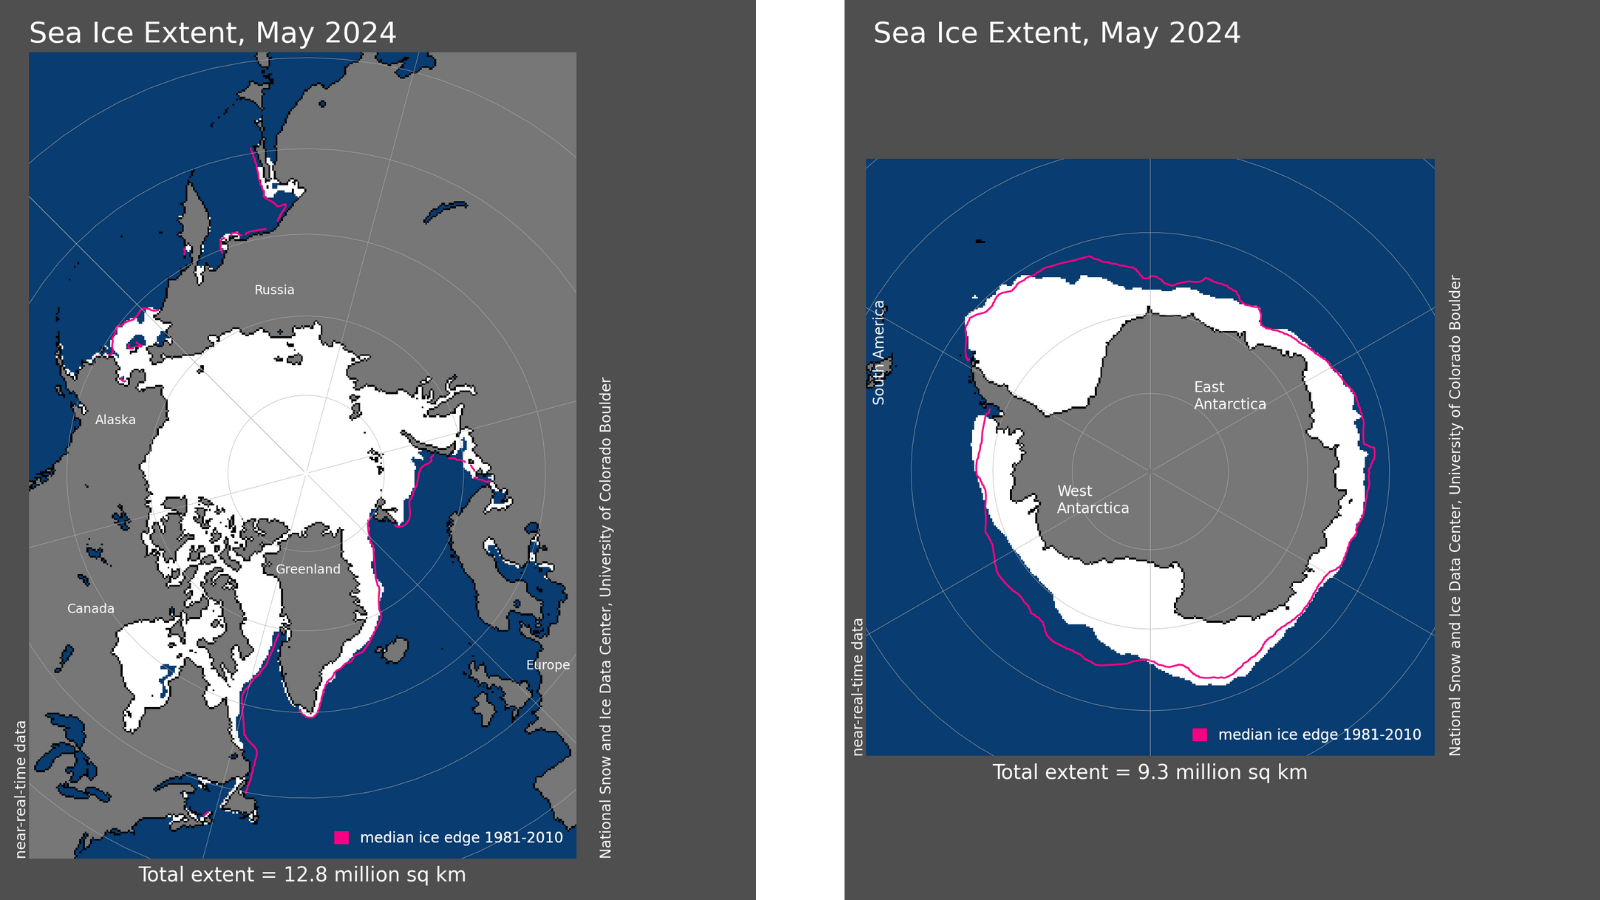 Maps depicting global sea ice extent for May 2024.